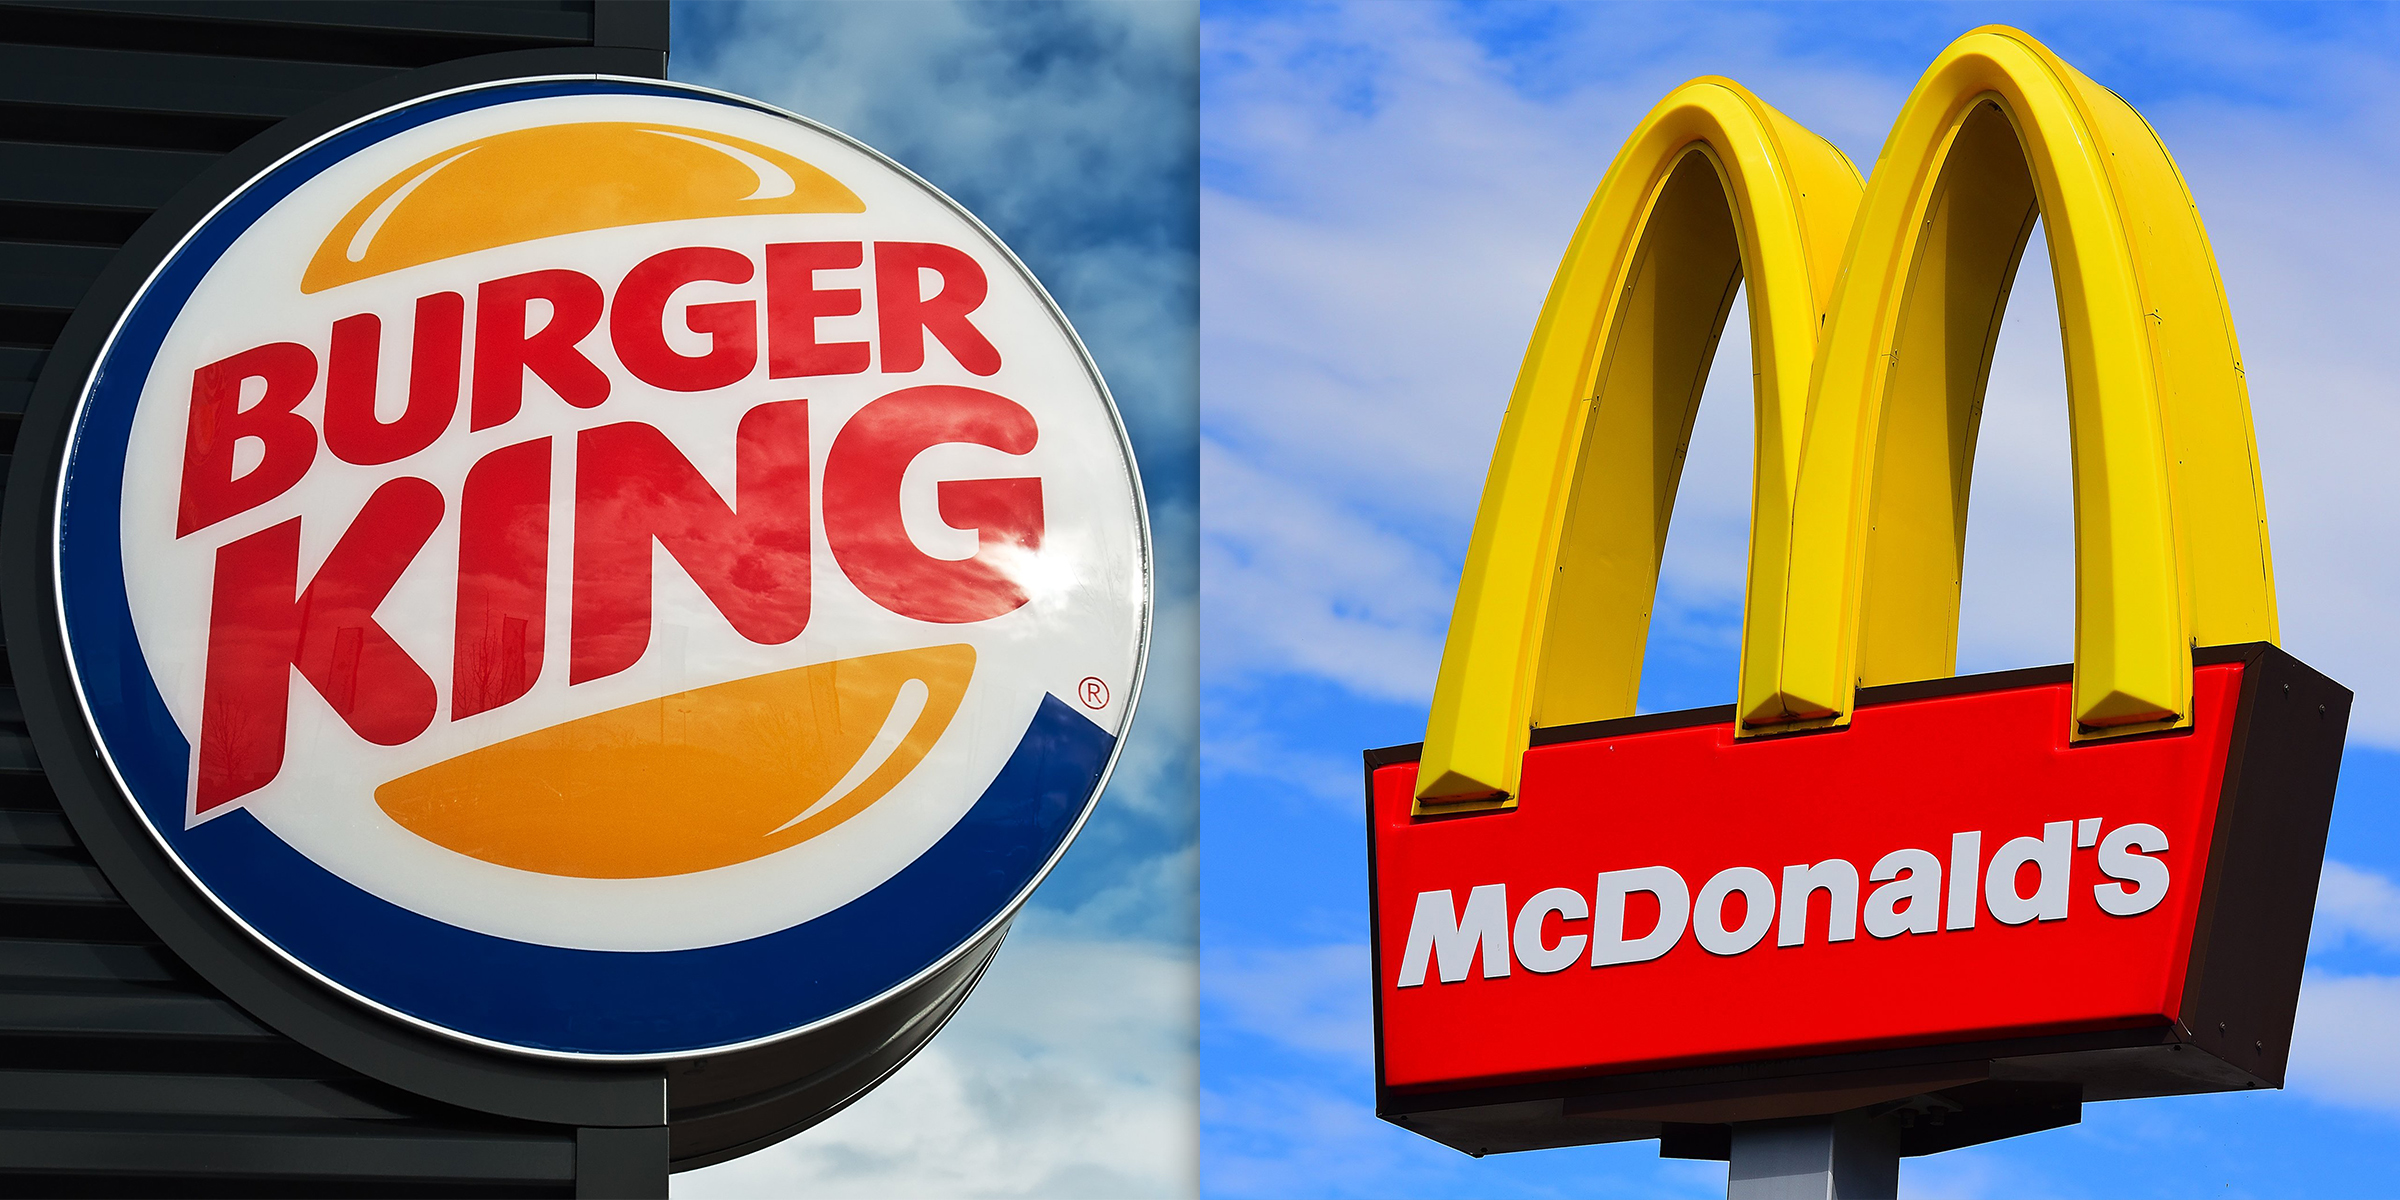 Is McDonald's More Famous than Burger King?